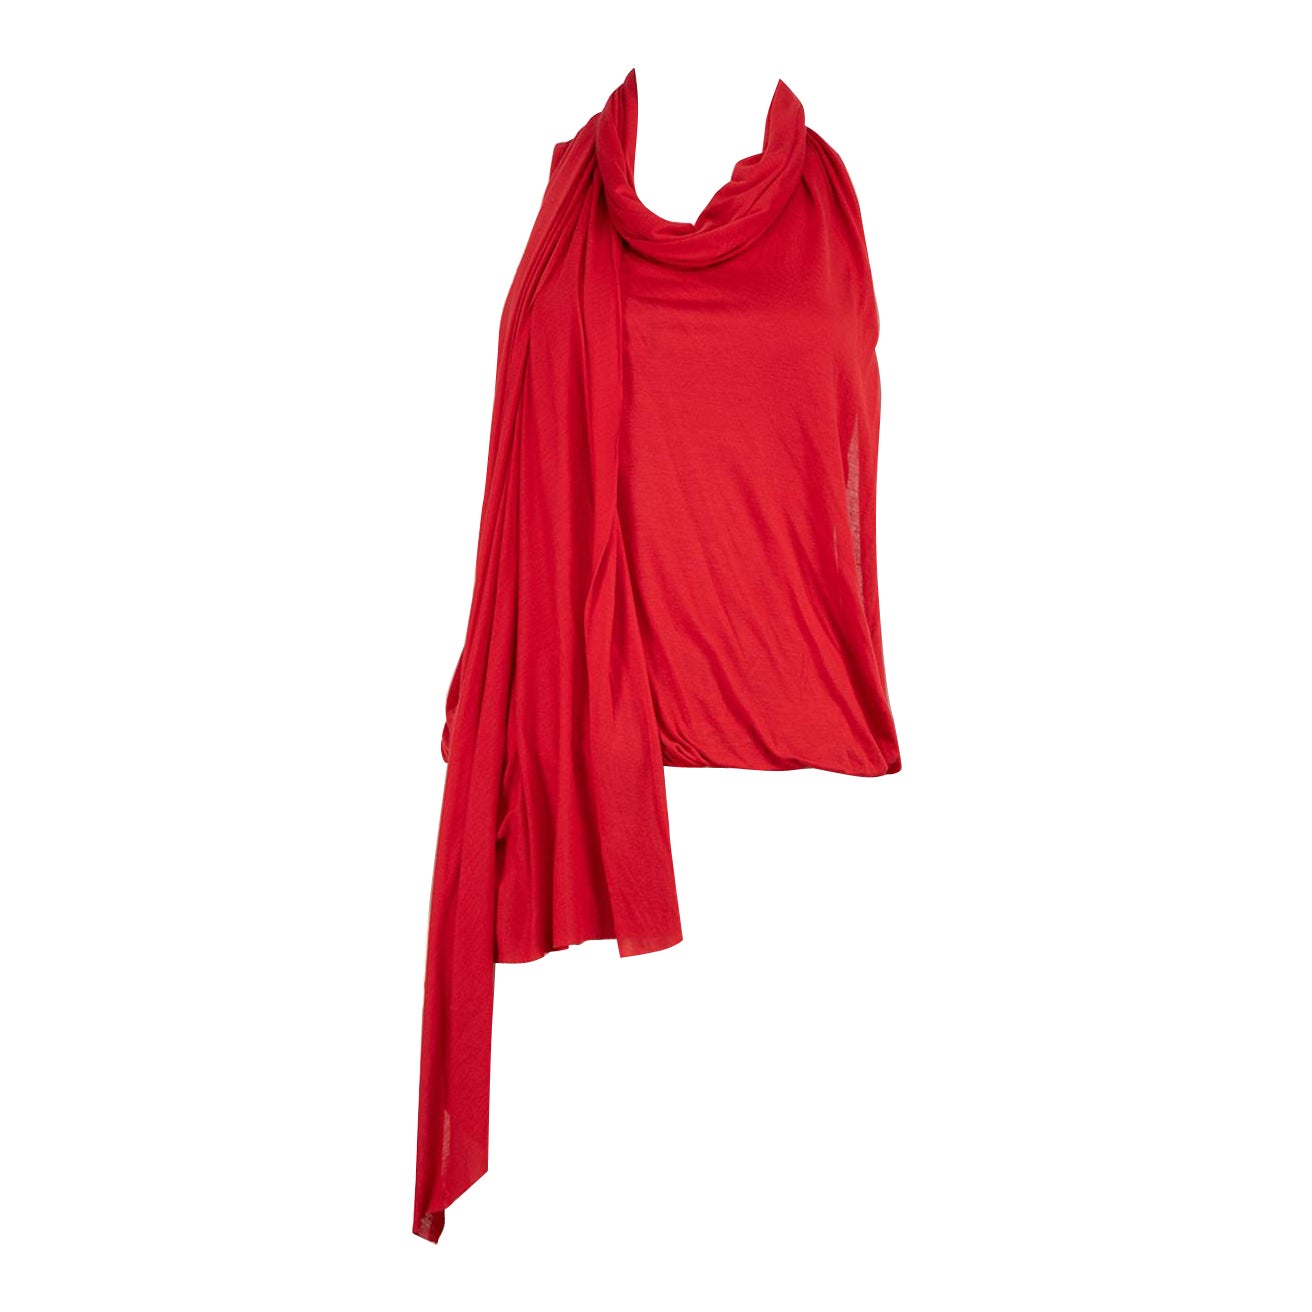 Alexander McQueen Red Draped Scarf Tank Top Size S For Sale